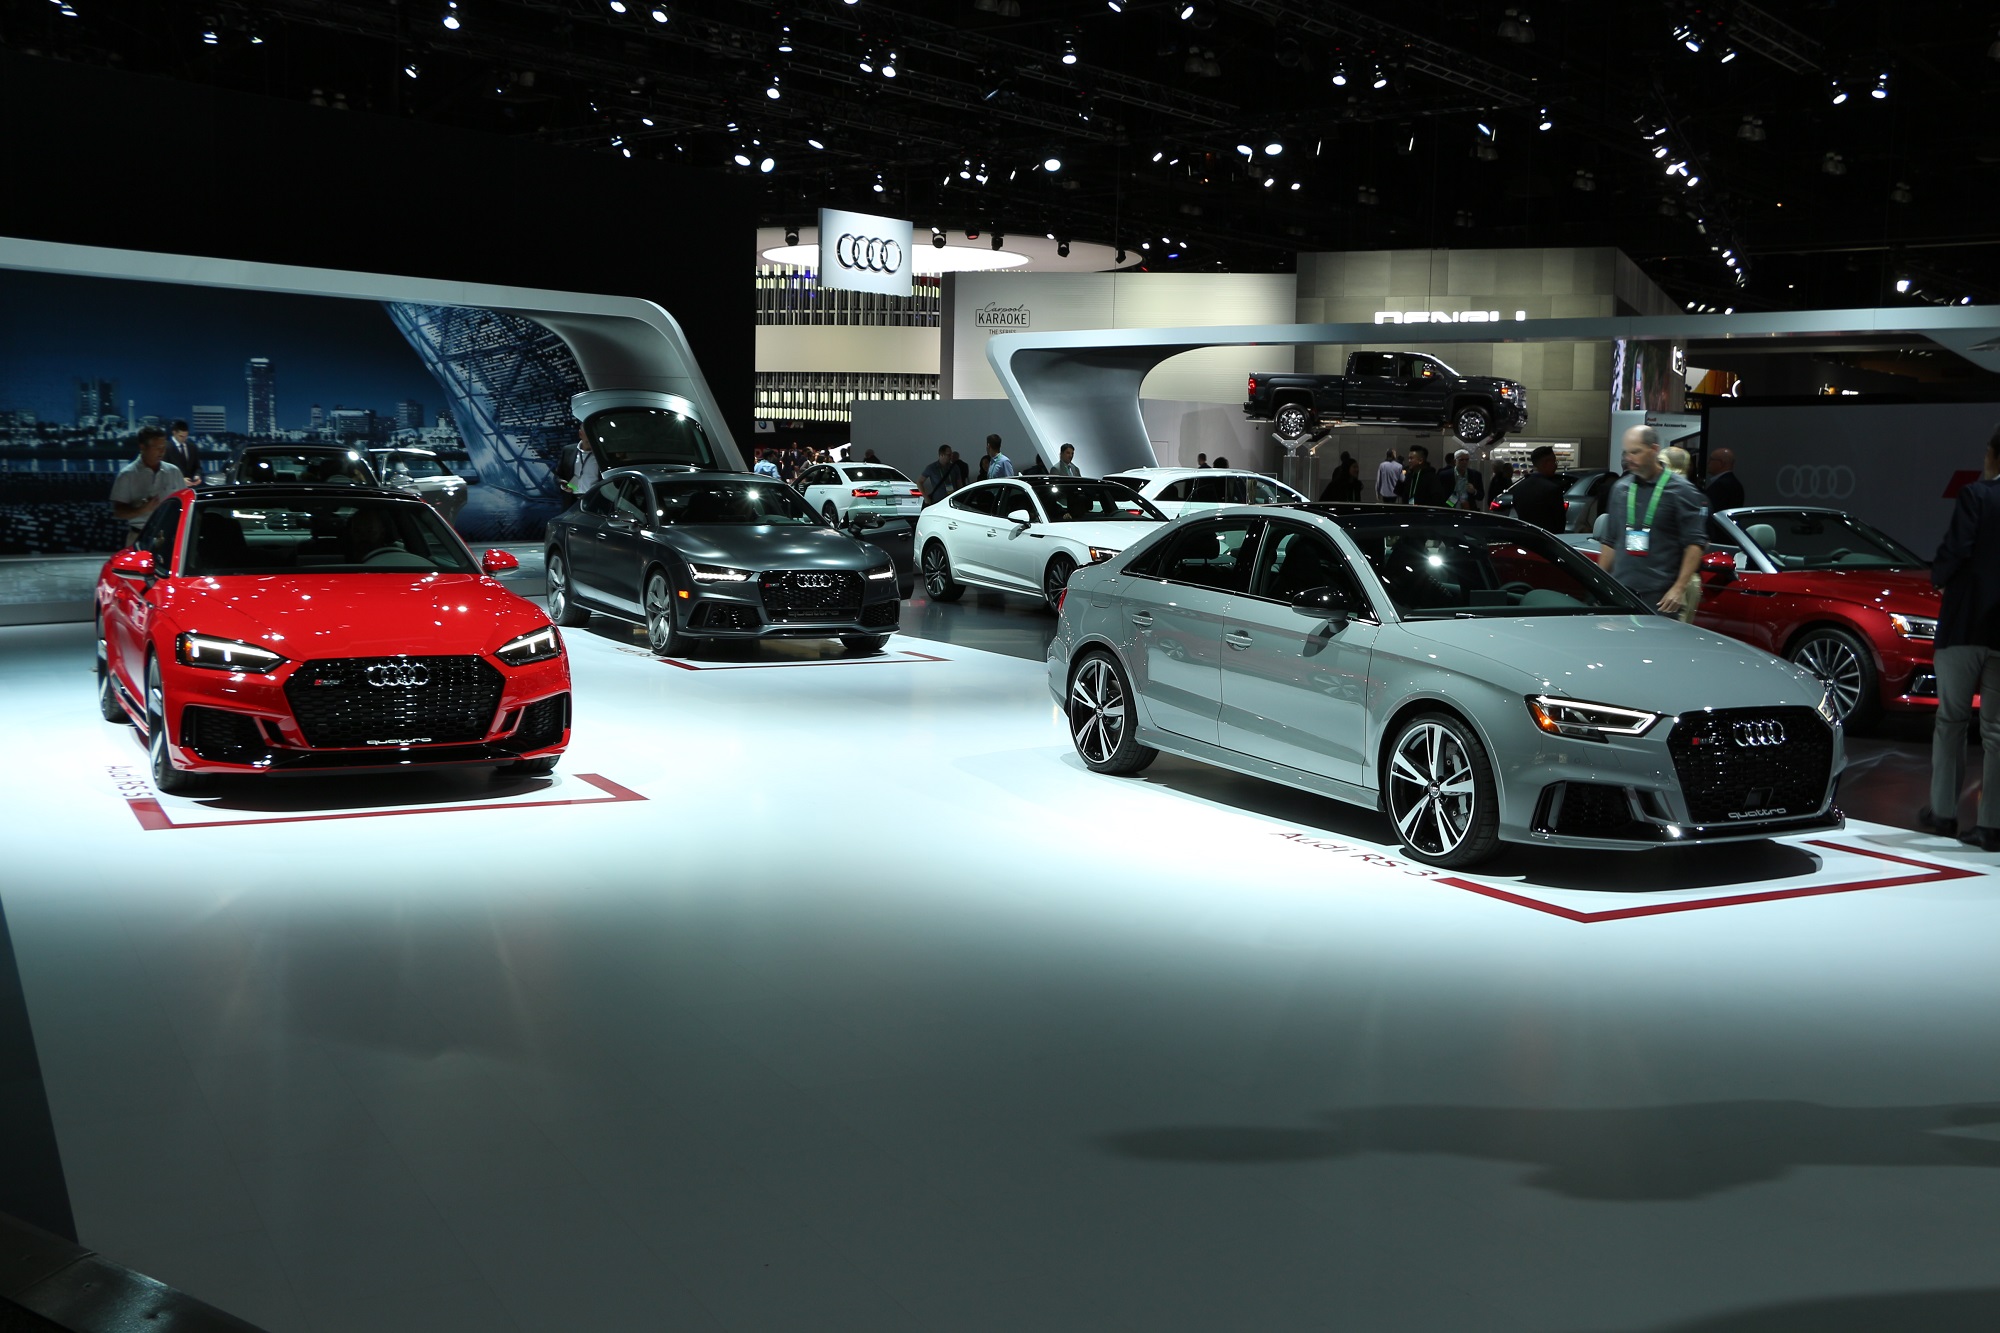 Audi at the 2017 Los Angeles Auto Show (Gallery)